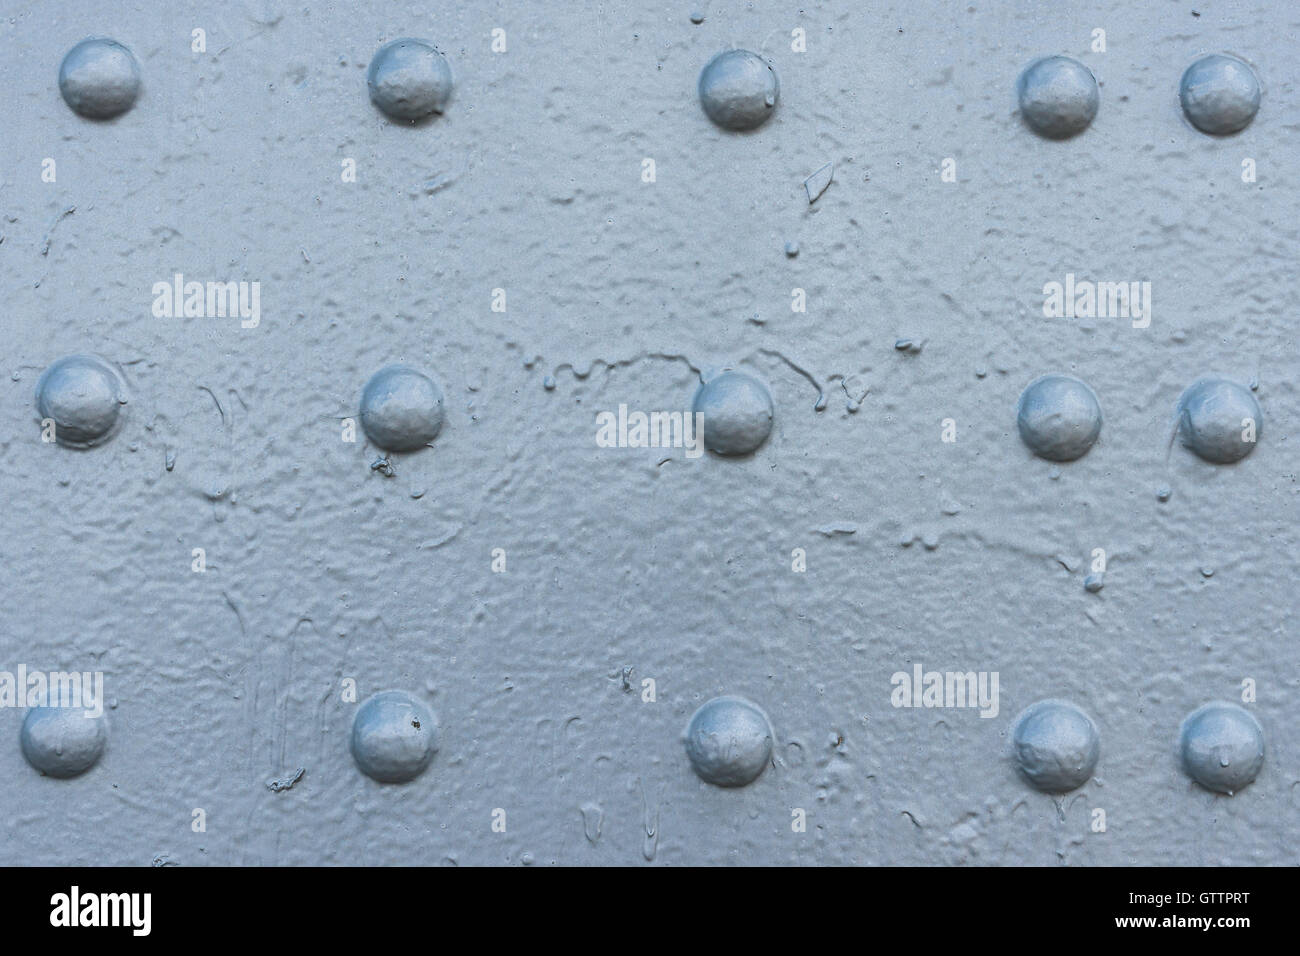 Bluish gray painted metal surface with three rows of rivet heads. Texture or background theme. Stock Photo